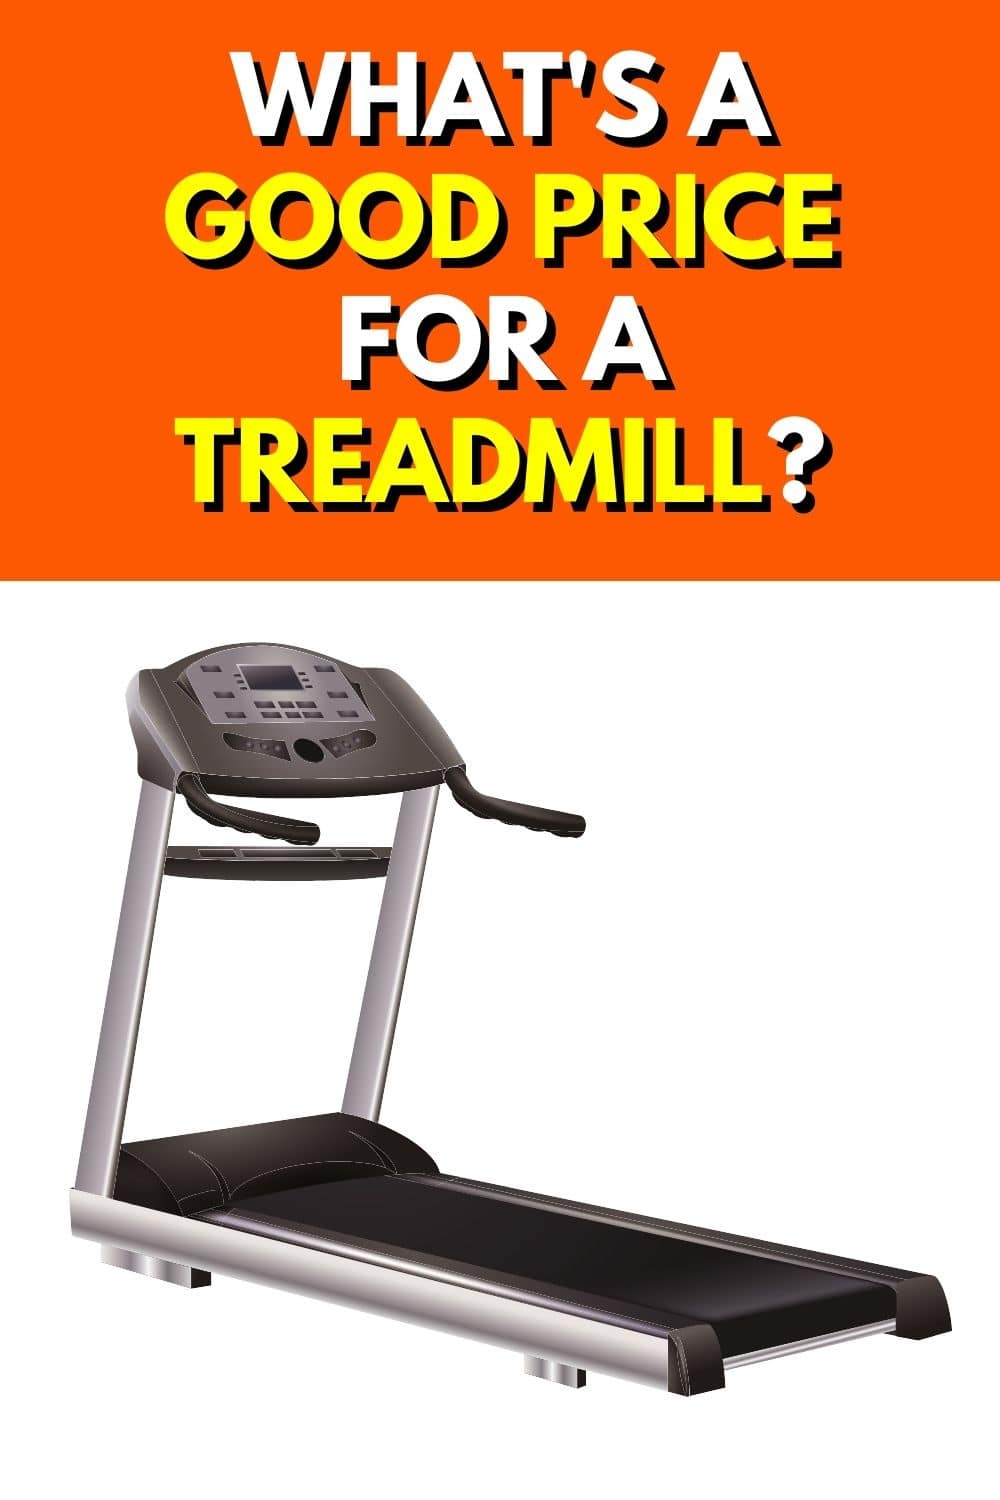 Good Price for a Treadmill